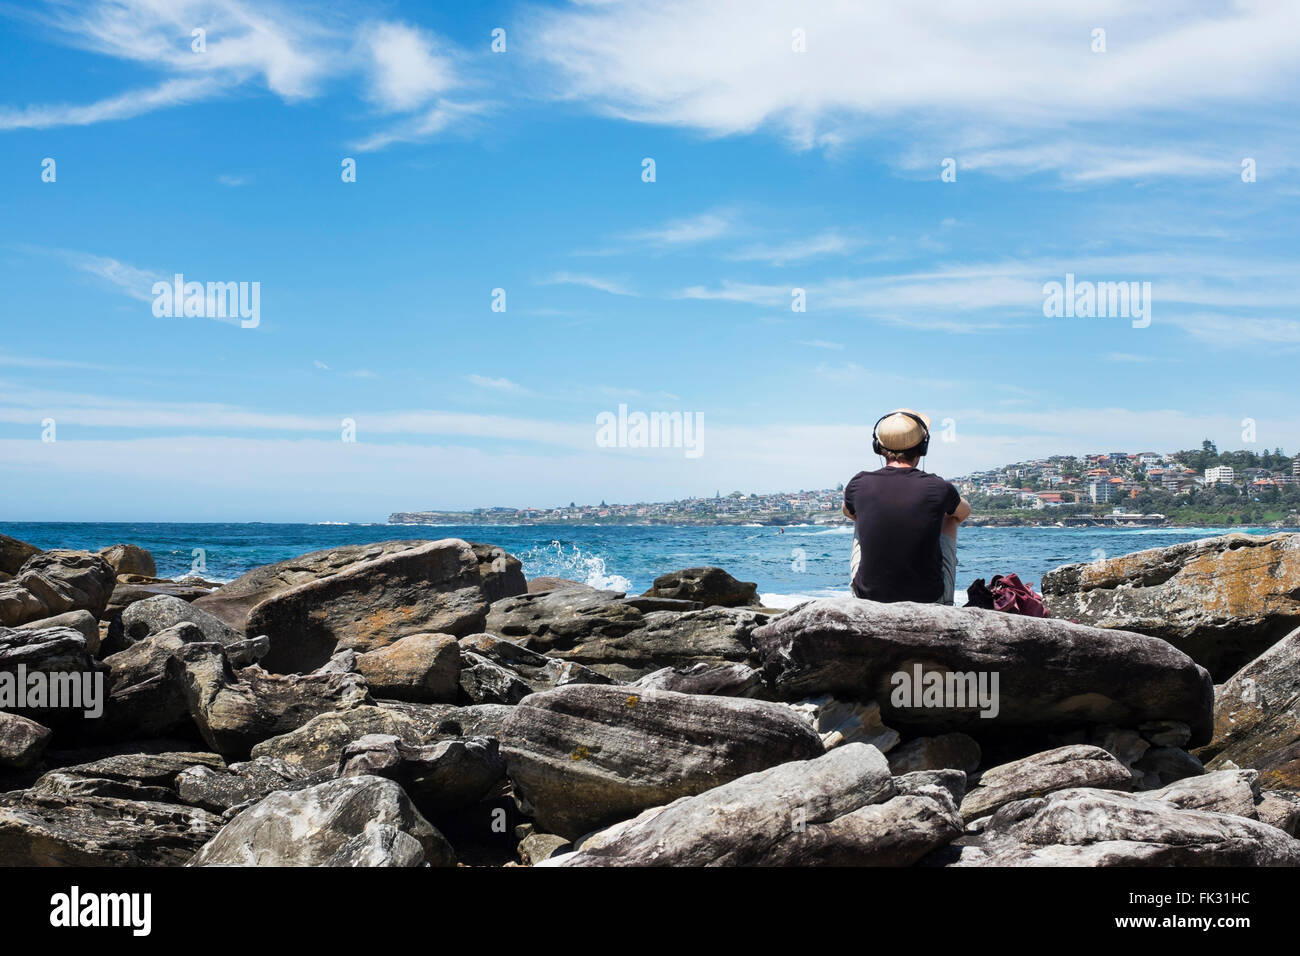 man looking out at the view over the sea, Coogie to Bondie walk, Sydney, NSW, Australia Stock Photo